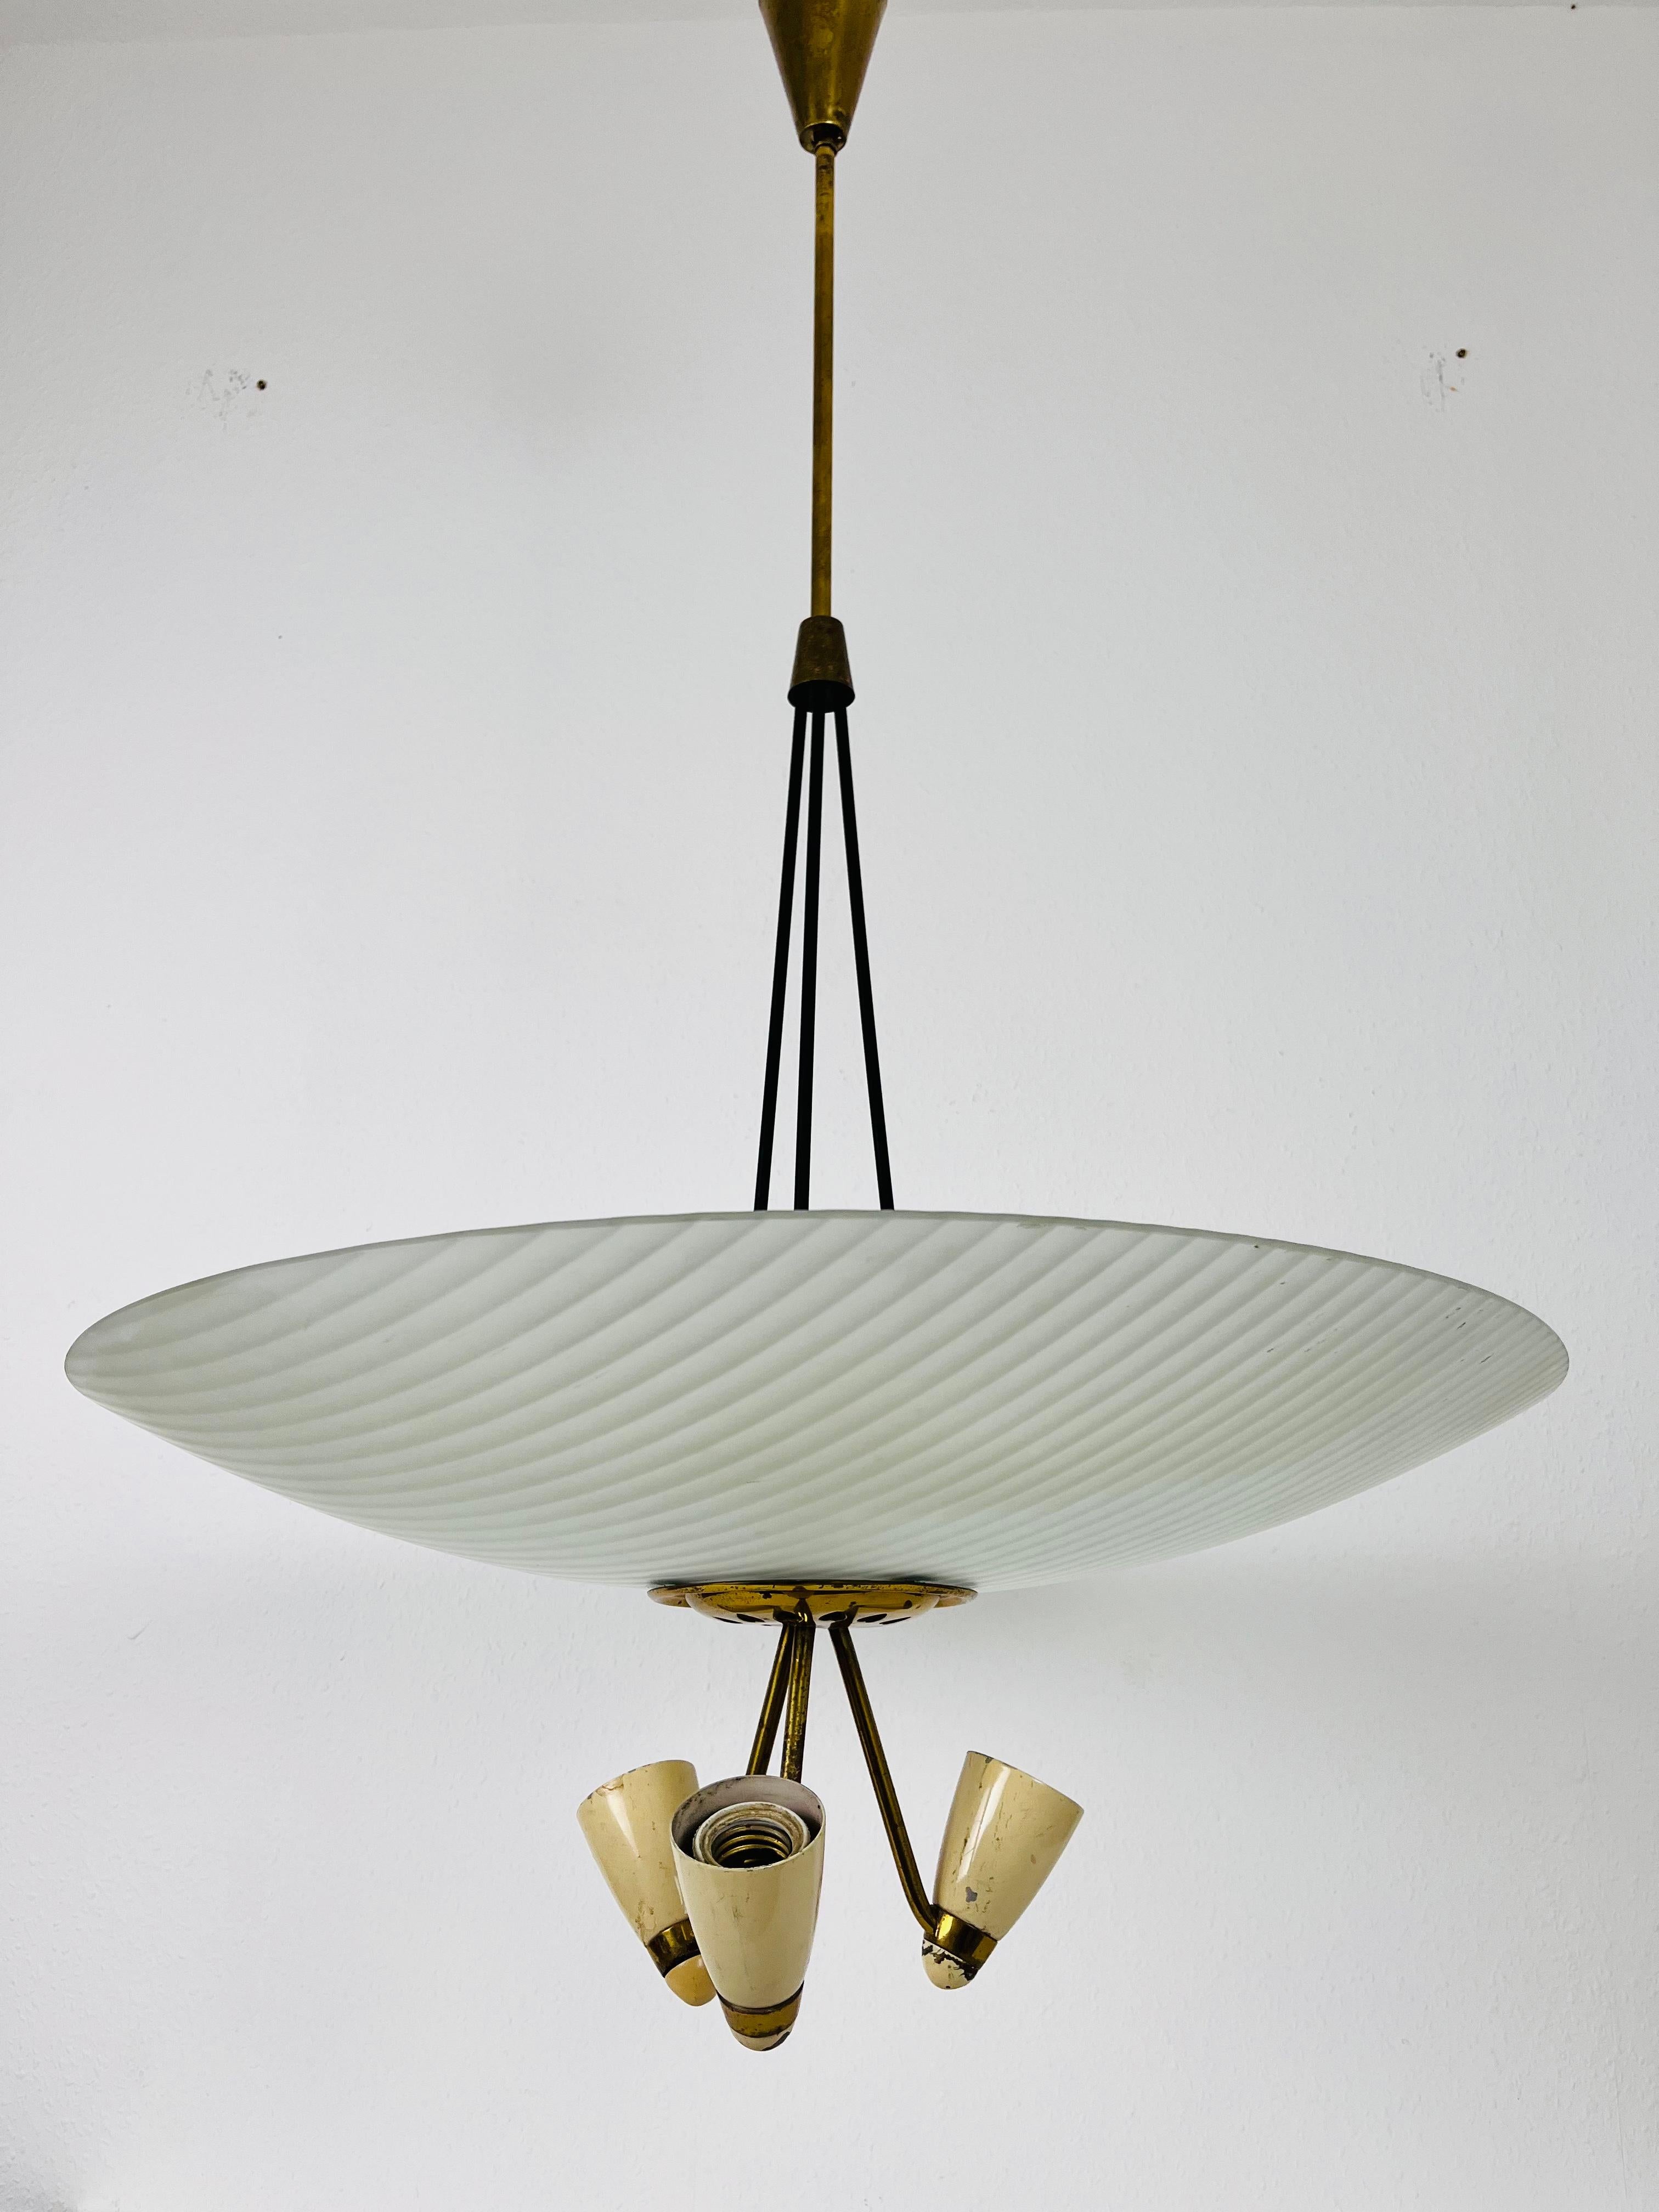 Italian Midcentury Brass and Glass Chandelier, 1950s For Sale 4